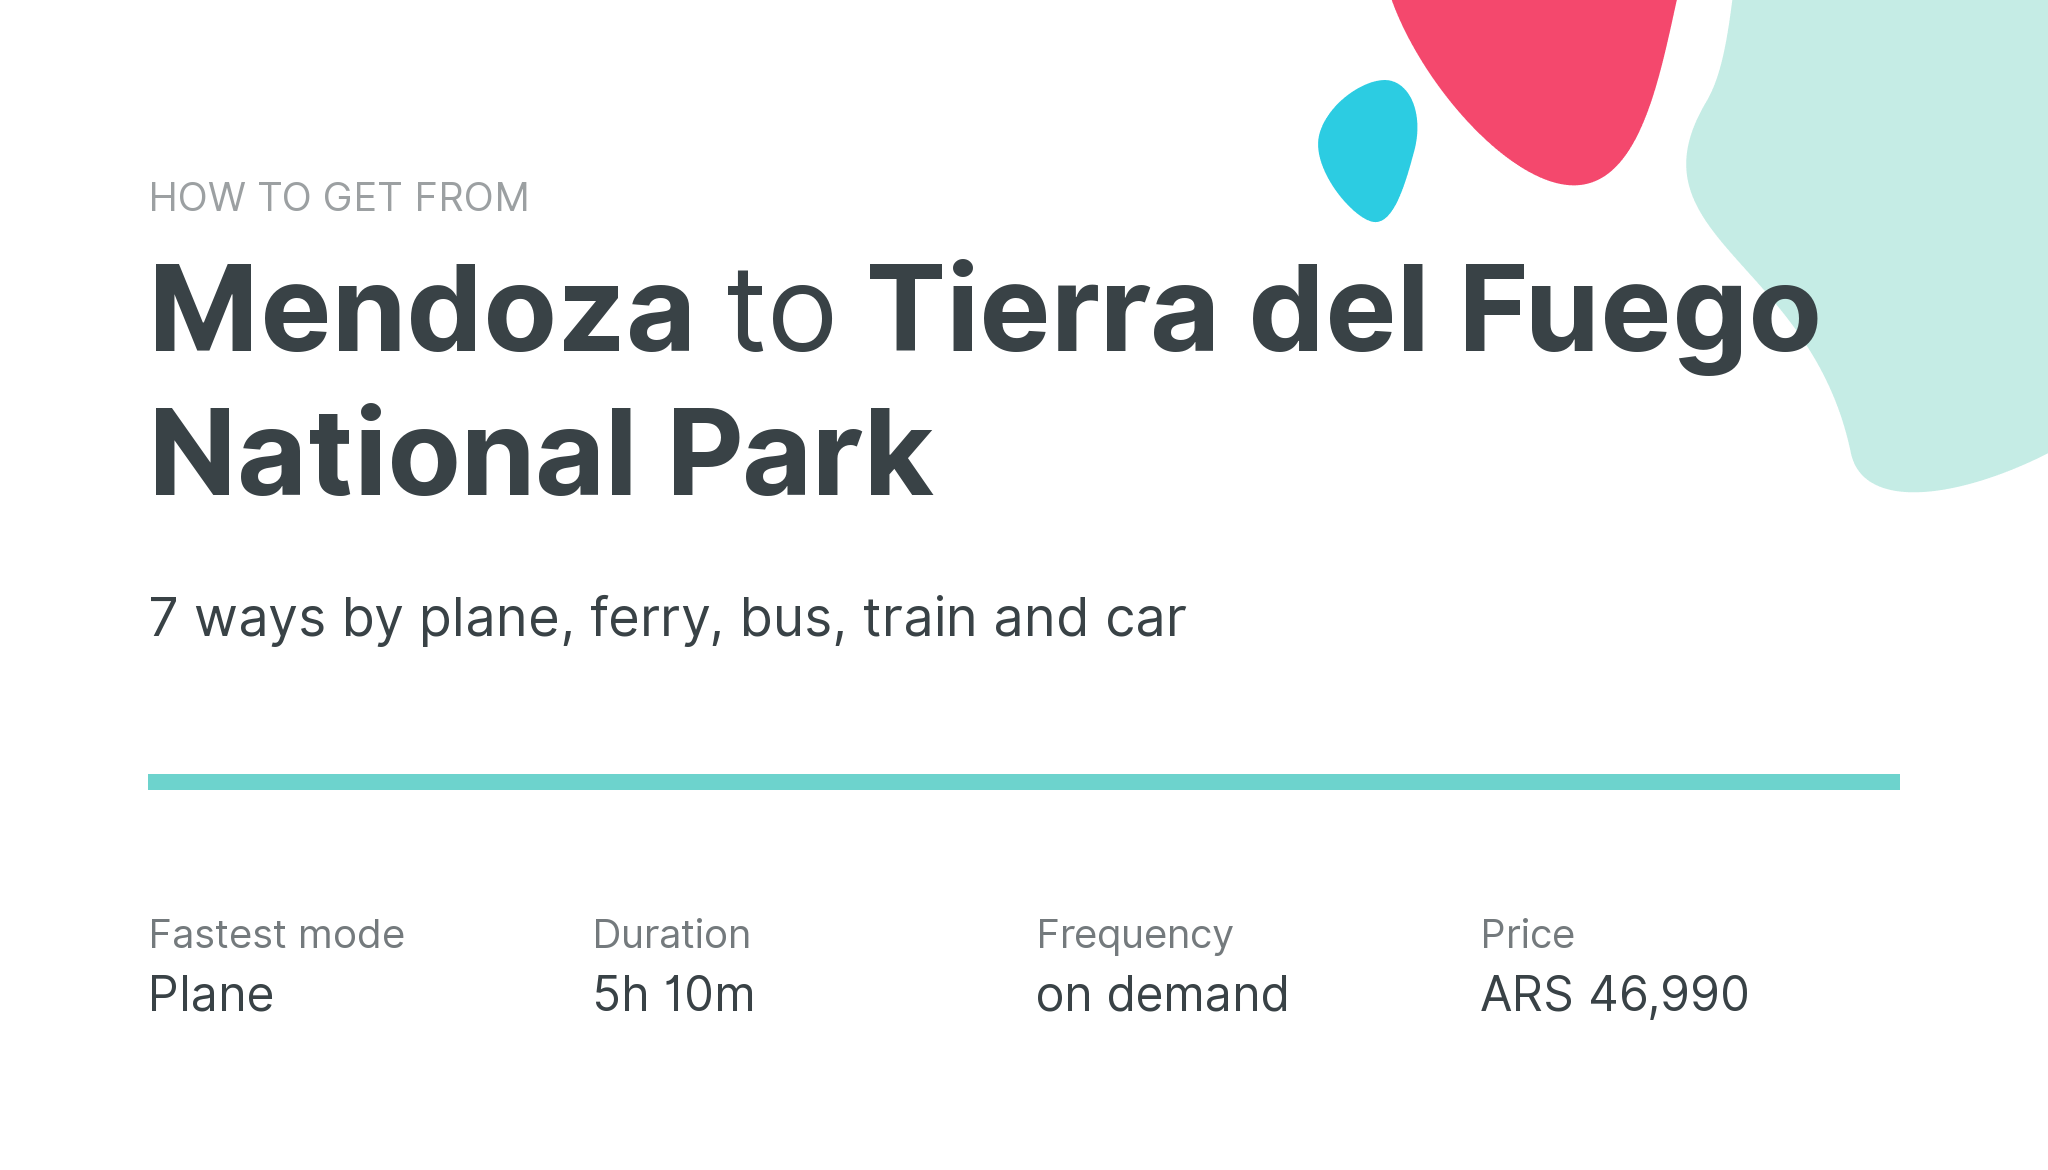 How do I get from Mendoza to Tierra del Fuego National Park